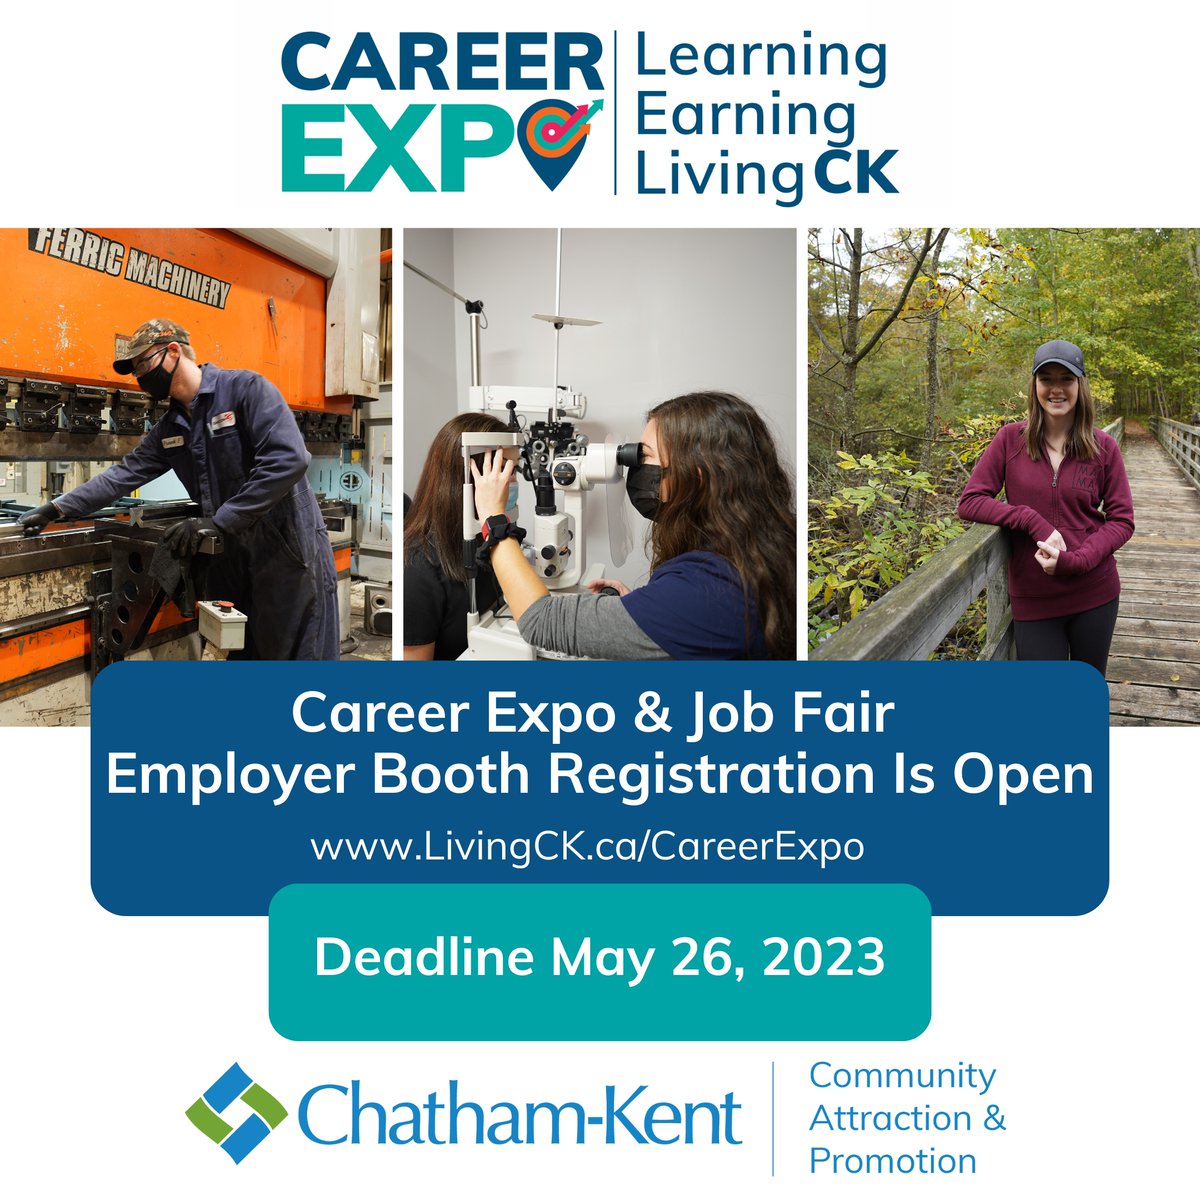 The Learning, Earning and LivingCK Career Expo and Job Fair will be hosted on October 18 & 19. This two day event will showcase employment opportunities and career pathways for in-demand jobs in #ckont.

To learn more and to register for a booth, visit LivingCK.ca/careerexpo.